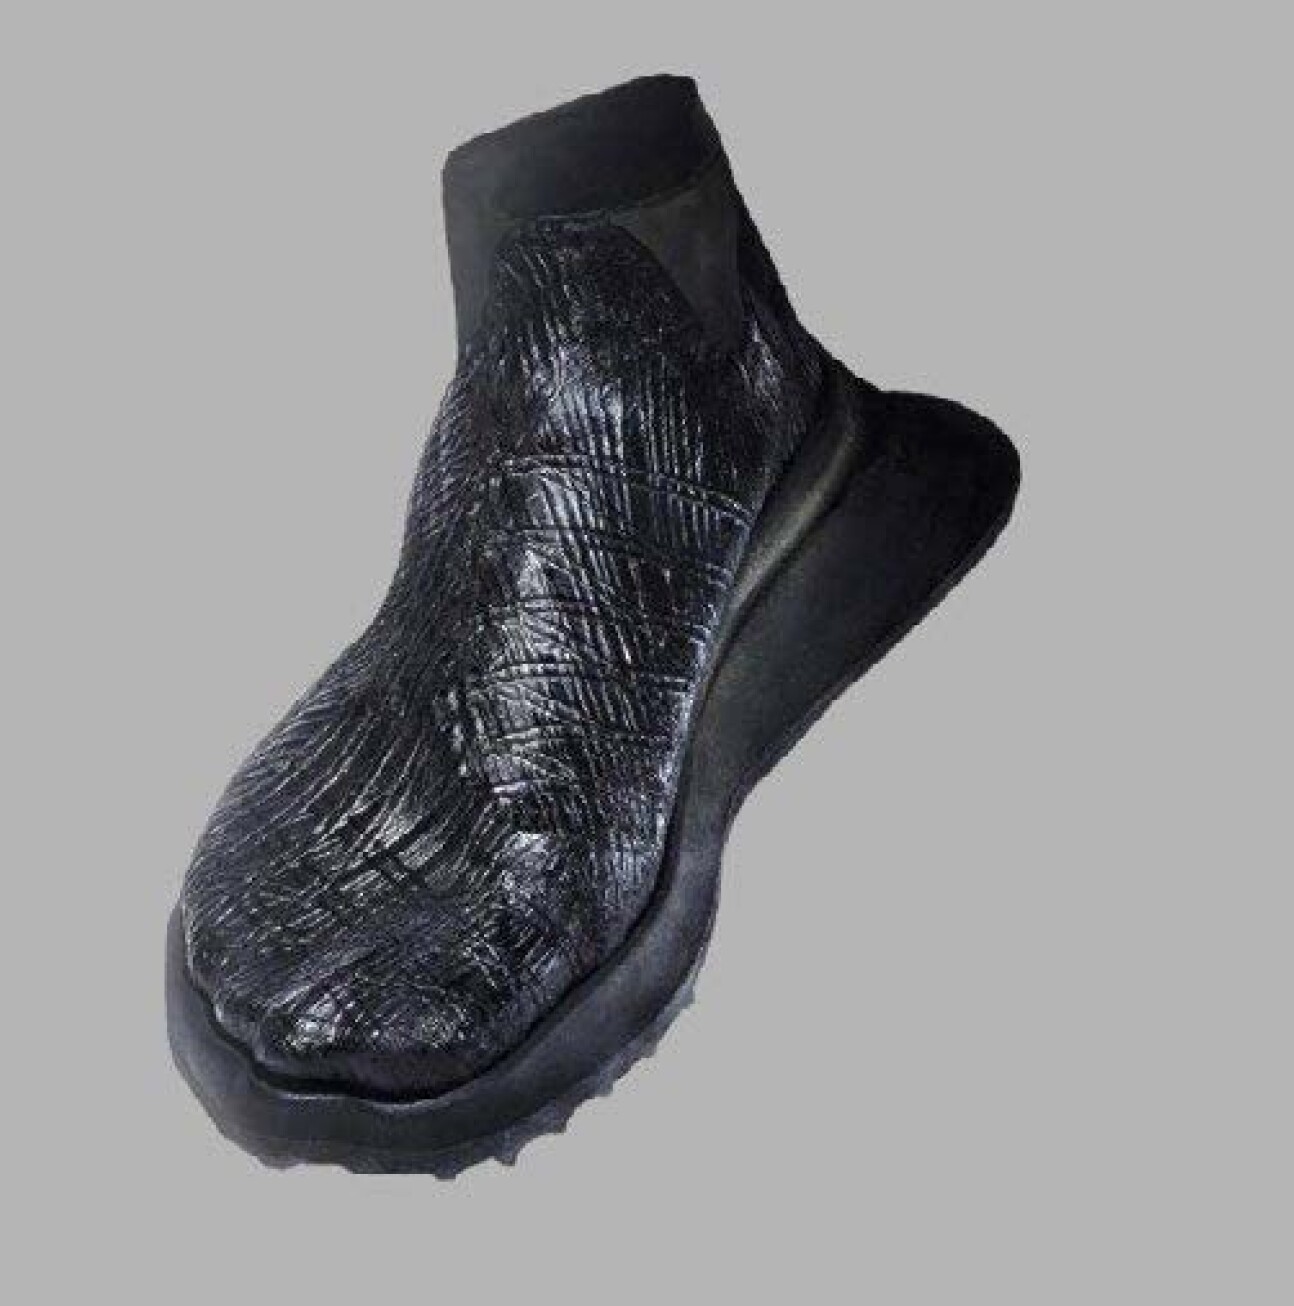 Moulded black shoe without sole